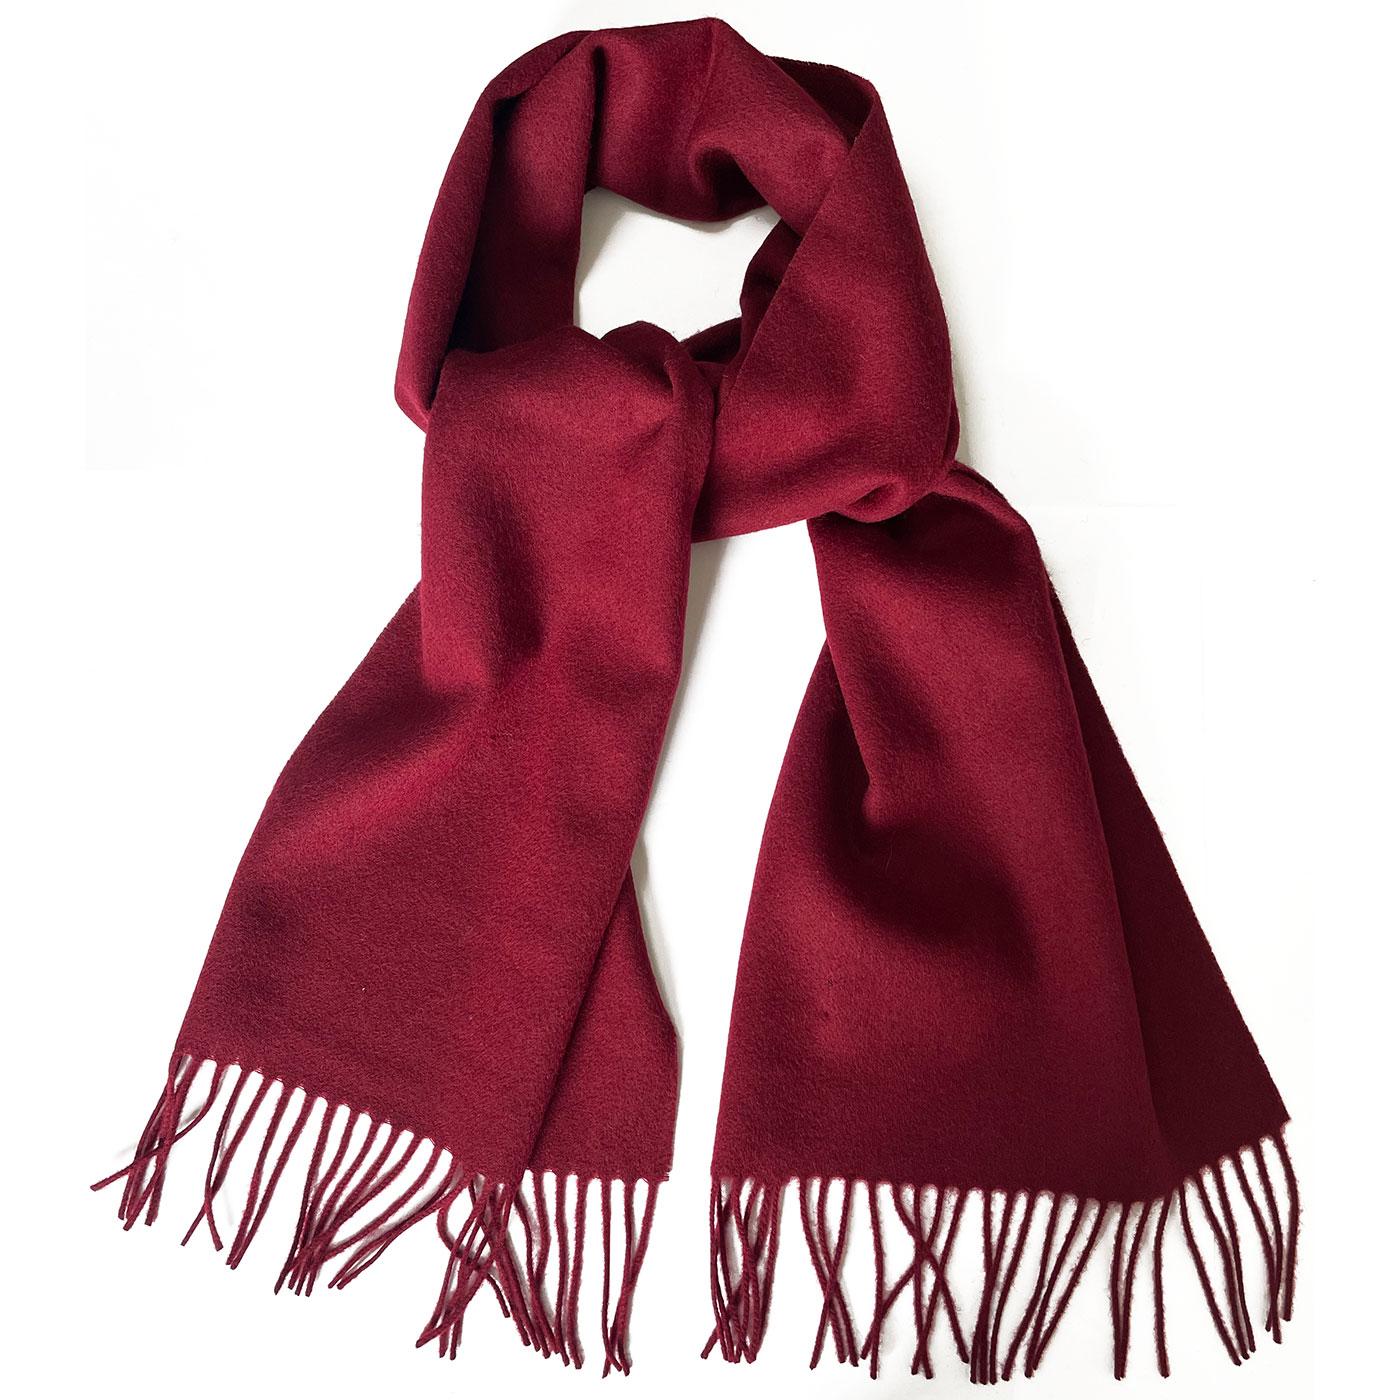 Failsworth Retro Mod Lambswool Knitted Scarf Wine